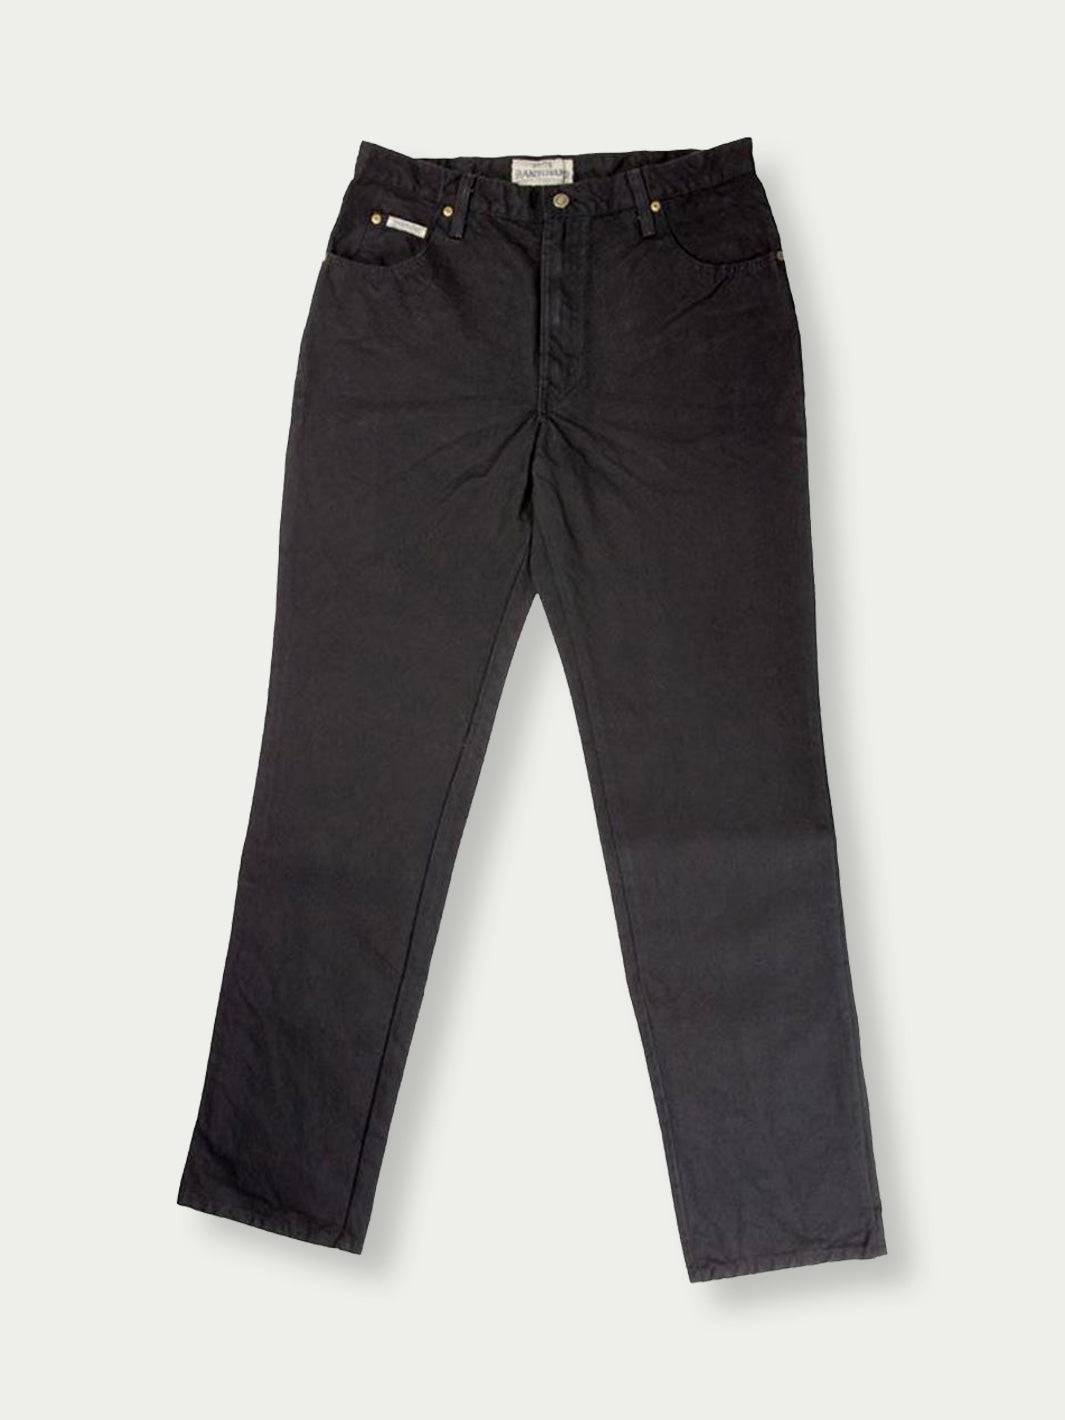 Fenceline® Canvas RanchHand Jeans | Schaefer Outfitter